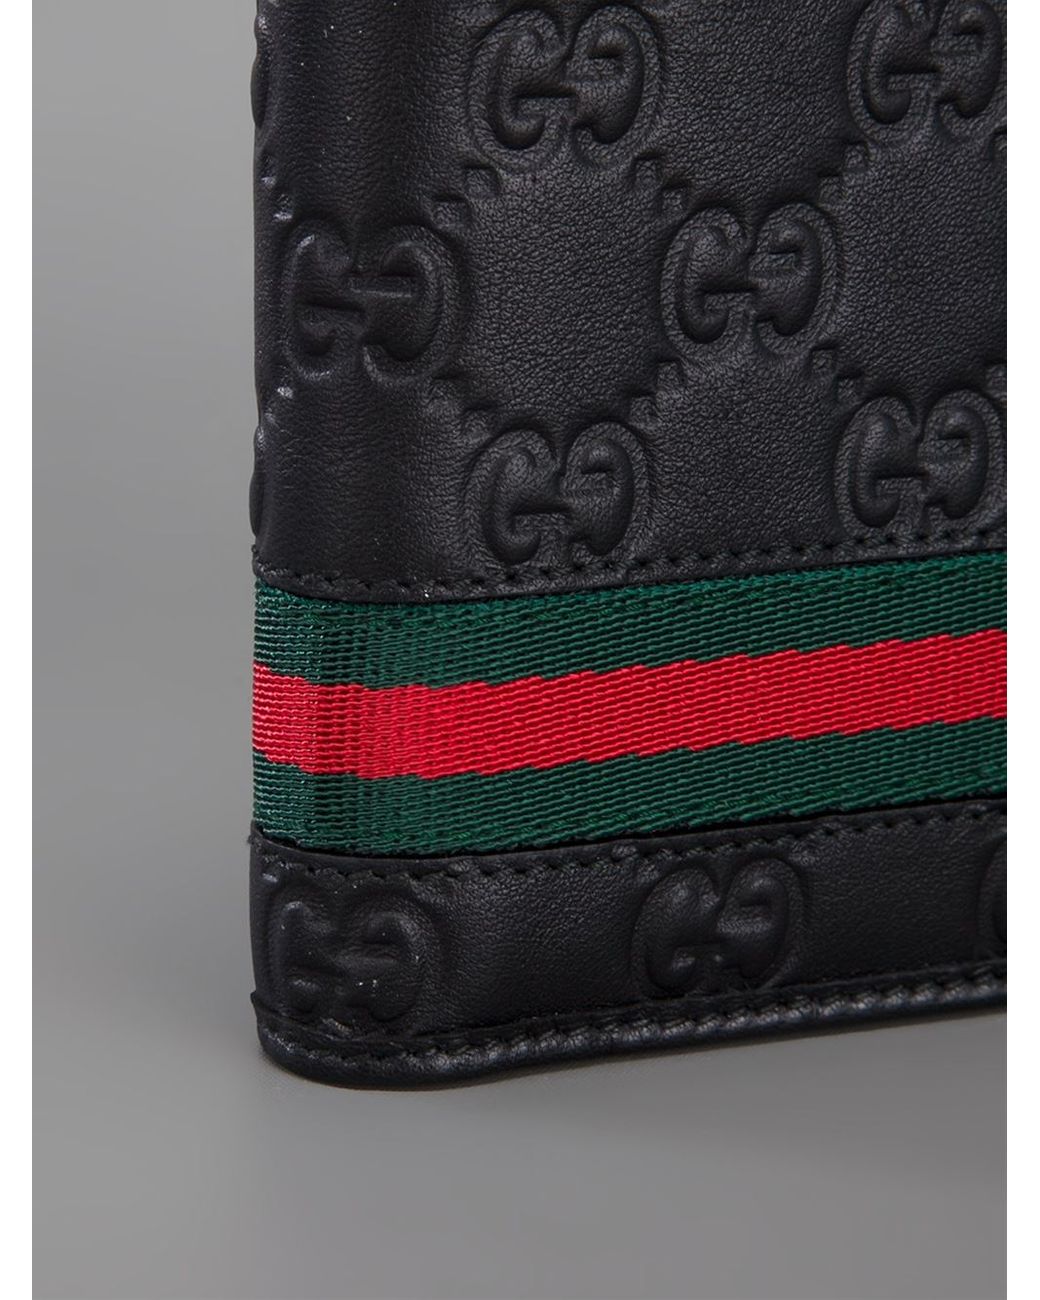 GUCCI Embossed Wallet Black RED green STRIPE Leather 459138 NEW